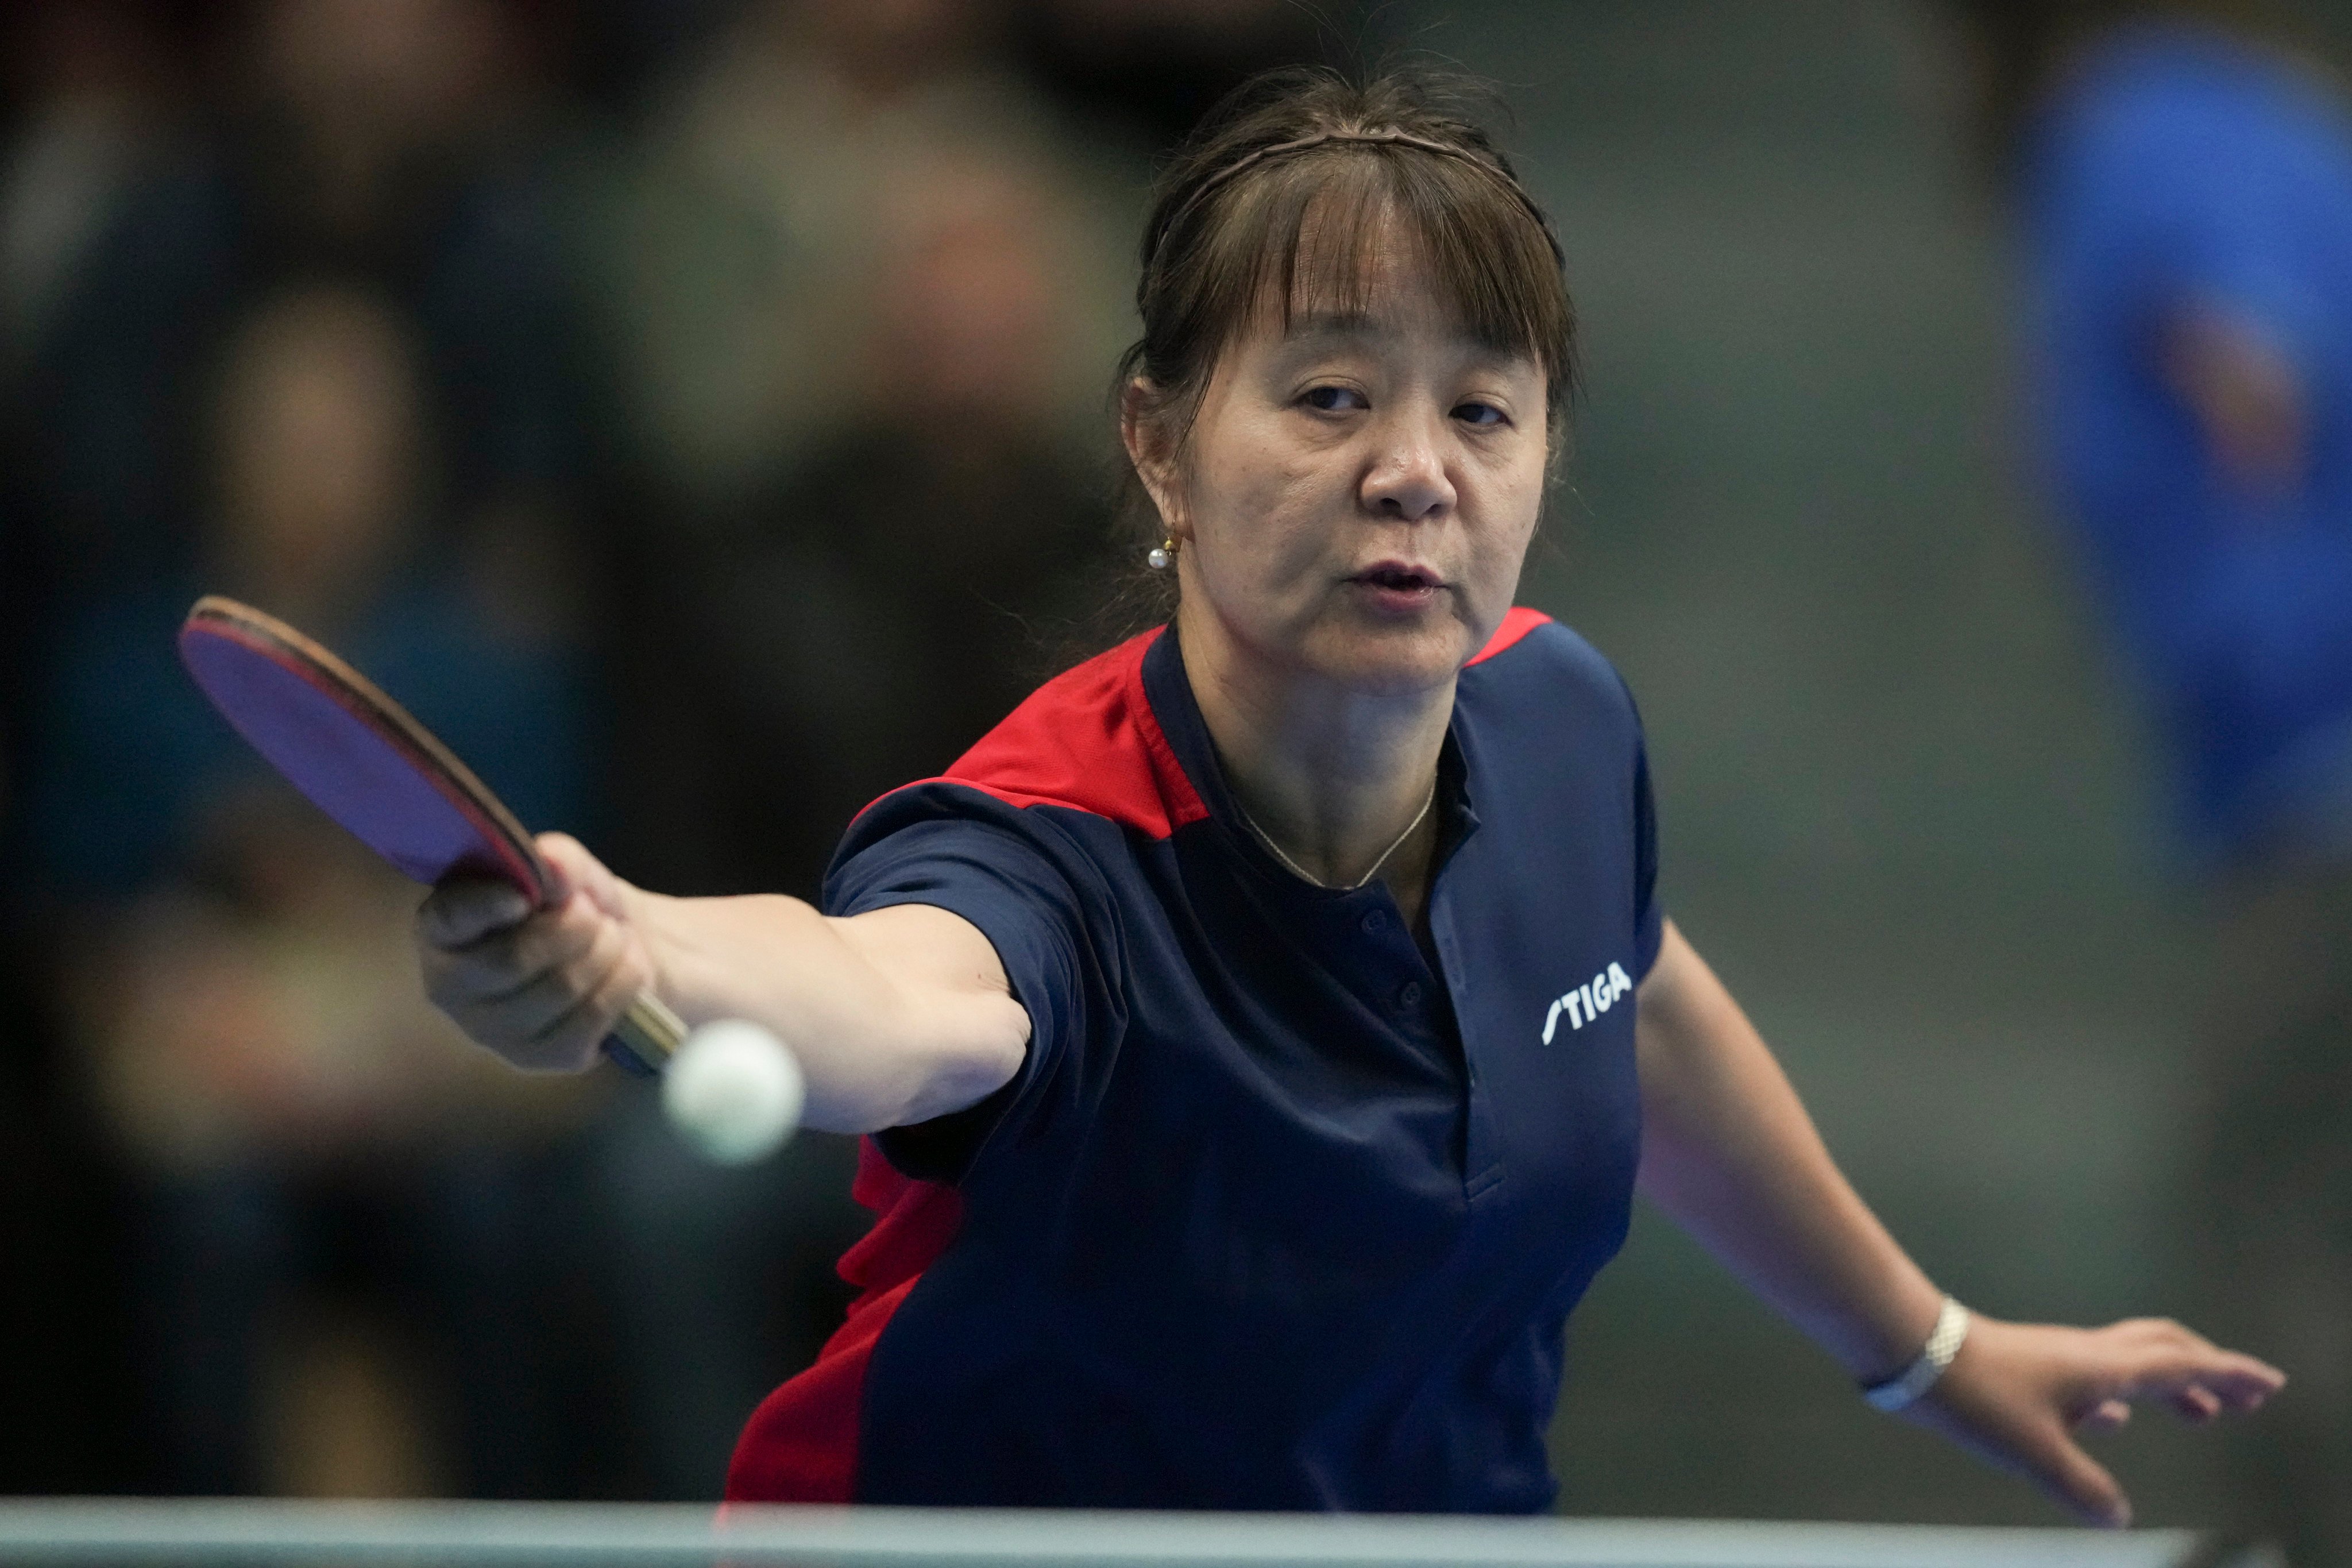 Chile’s Zeng Zhiying lost to American Lily Ann Zhang at the Pan American Games in Chile. Photo: AP